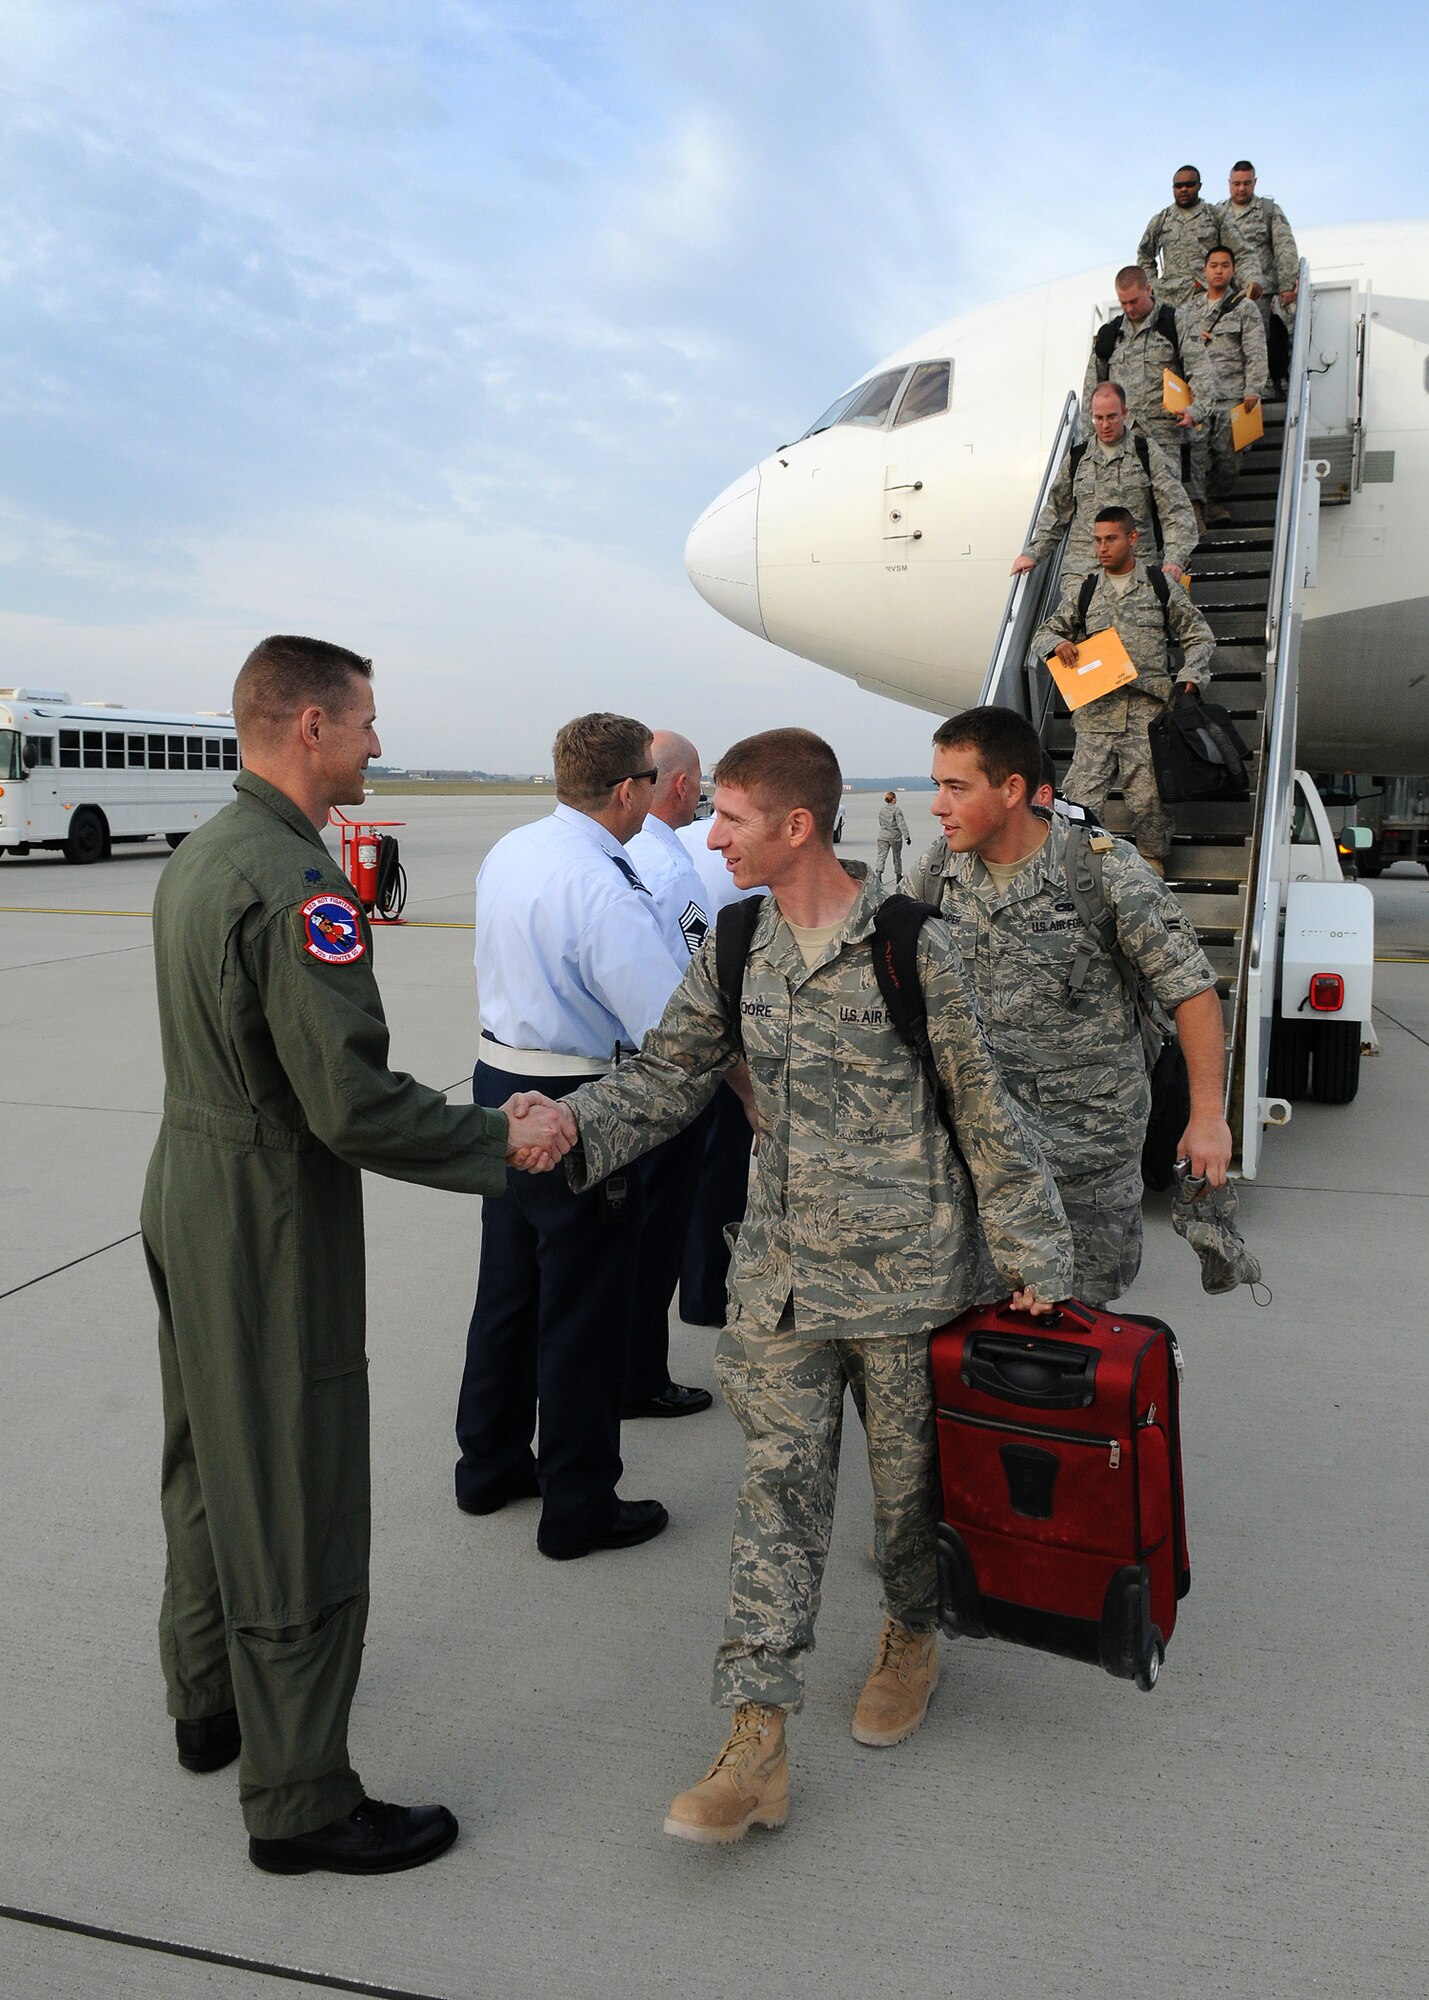 SPANGDAHLEM AIR BASE, Germany - Lt. Col. Douglas Nikolai, 22nd Fighter Squadron commander, greets members of the 52nd Aircraft Maintenance Squadron and 52nd Equipment Maintenance Squadron which returned from a four-month deployment Sept. 28 on the flightline. (U.S. Air Force photo/Airman 1st Class Nathanael Callon)